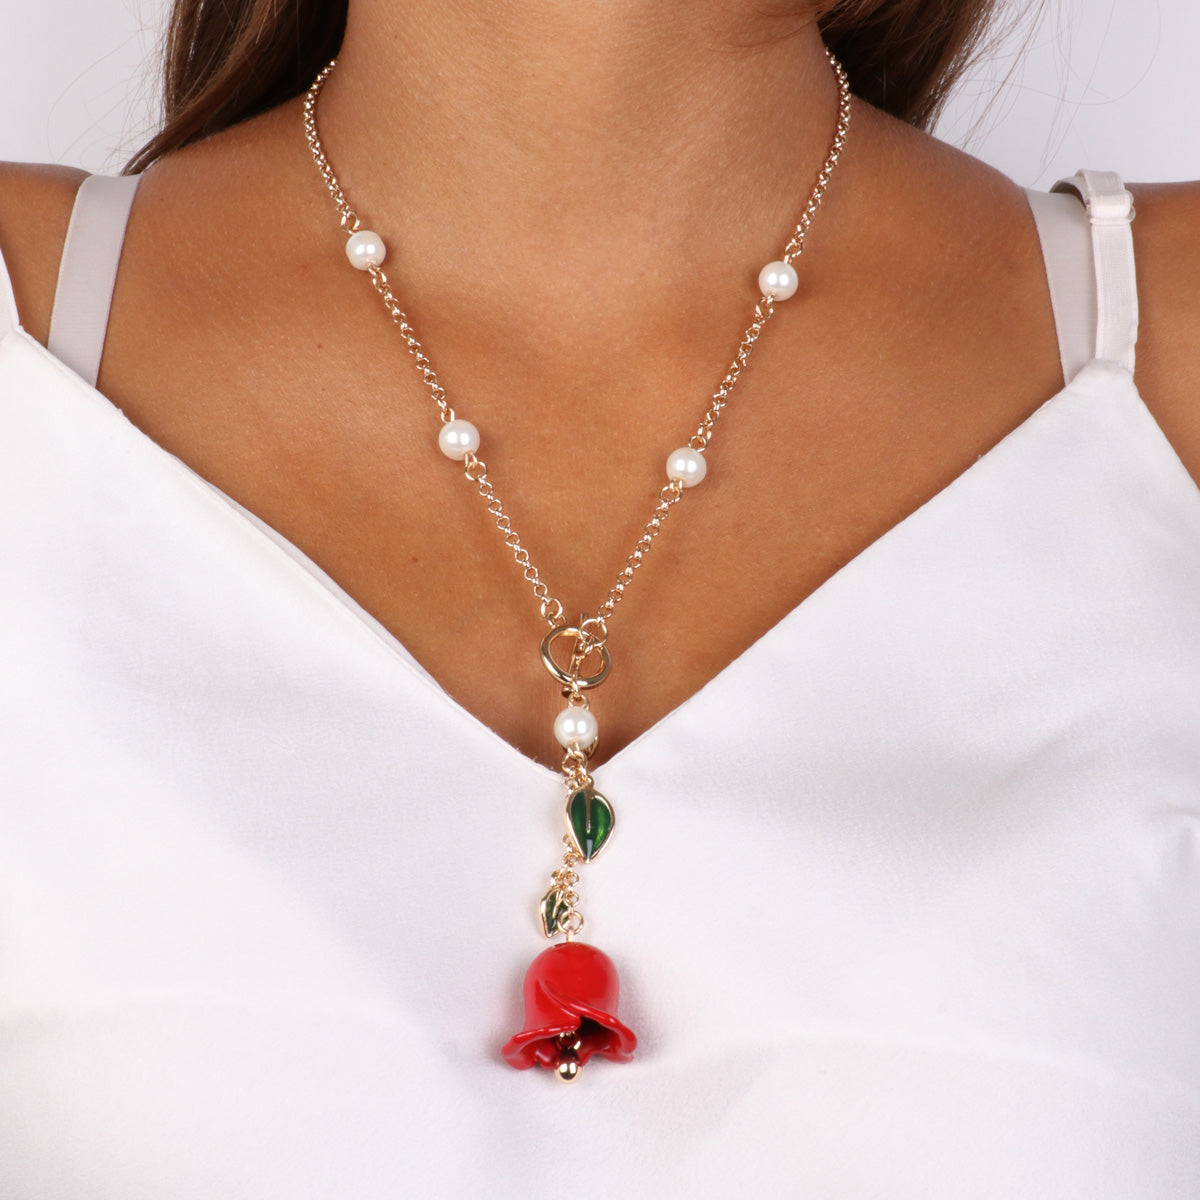 Metal necklace with t -closure and bell pendant in the shape of red rose and leaves